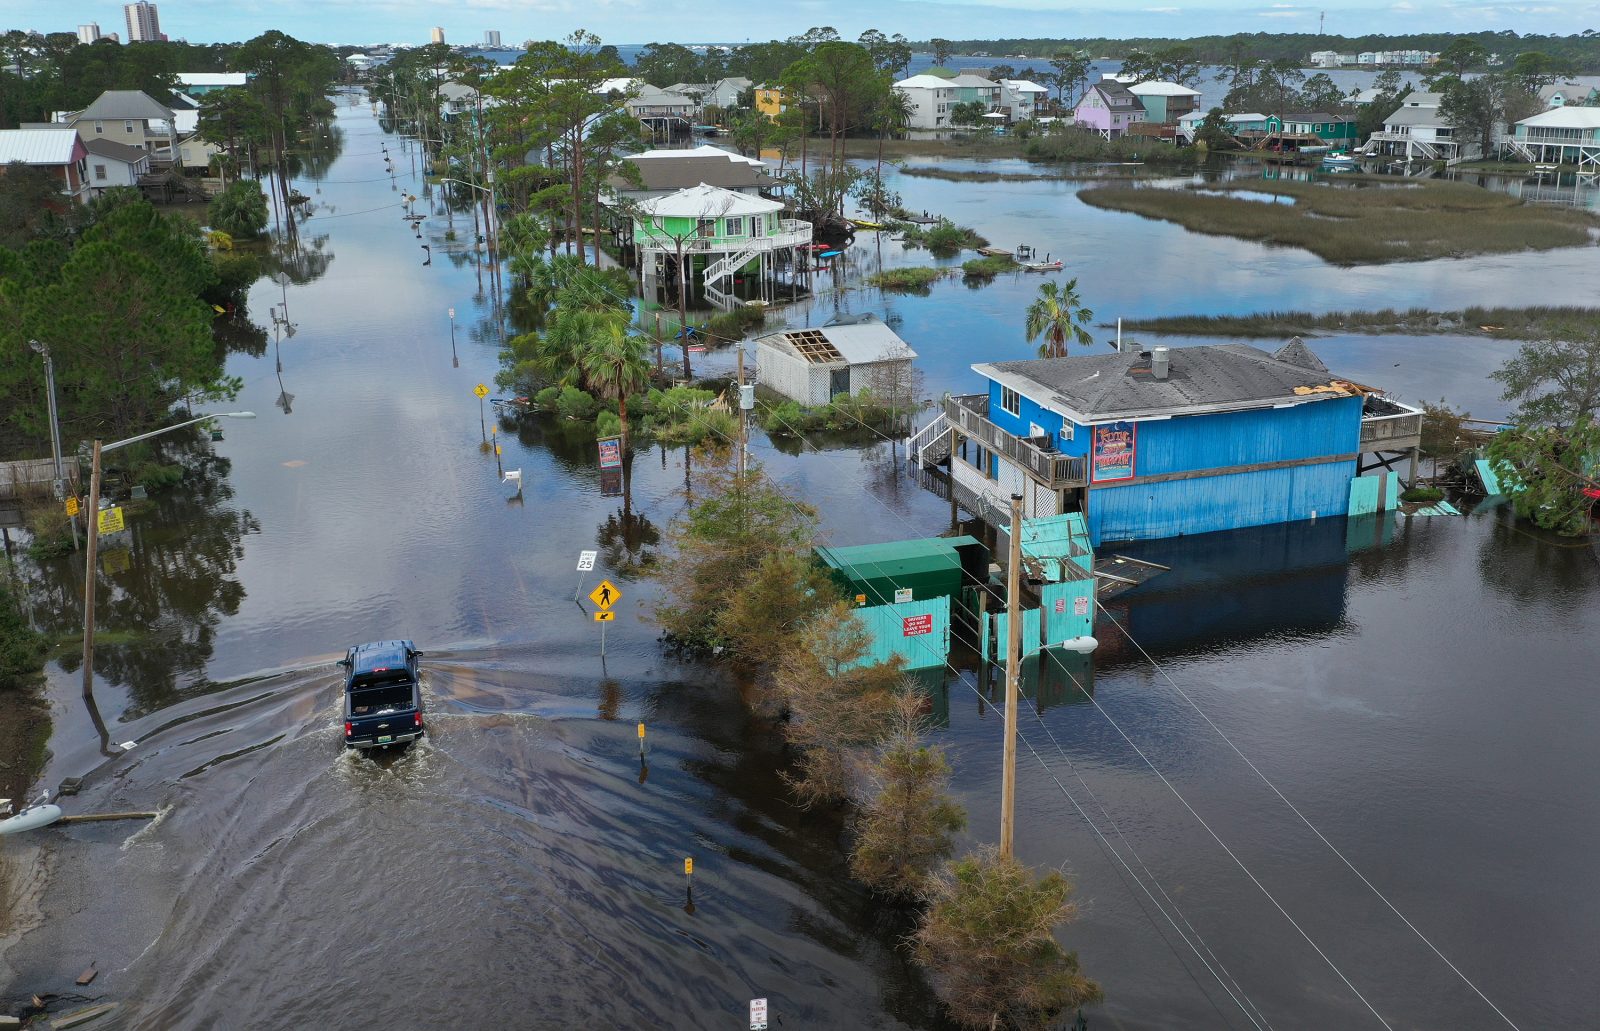 An aerial view from a drone shows a vehicle driving through a flooded street after Hurricane Sally passed through the area on September 17, 2020 in Gulf Shores, Alabama. The storm came ashore with heavy rain and high winds.